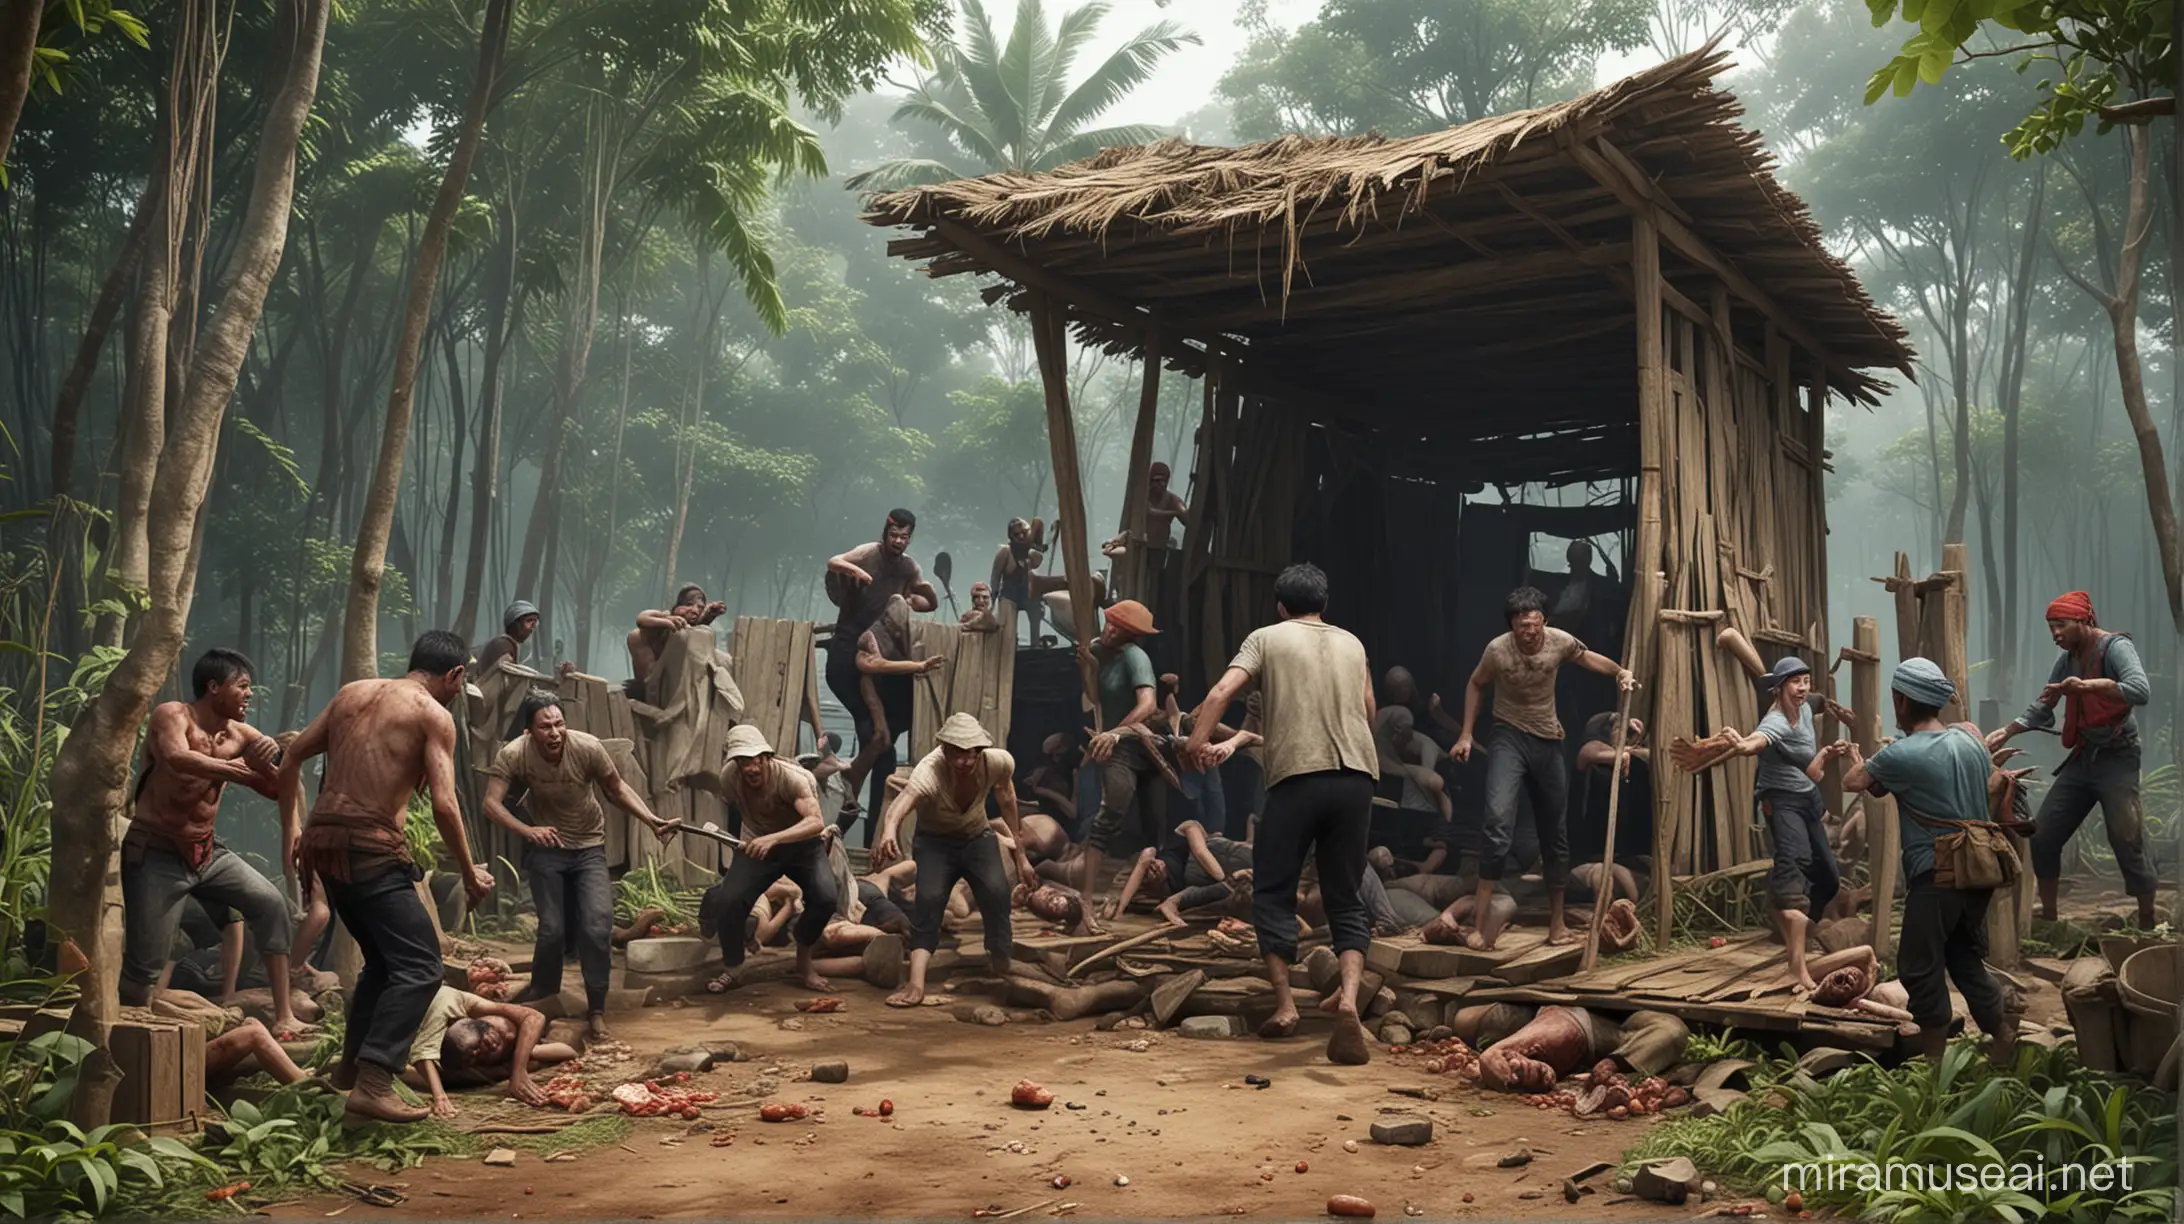 Survivors Building Shelter While Fending Off Zombies in Vietnam